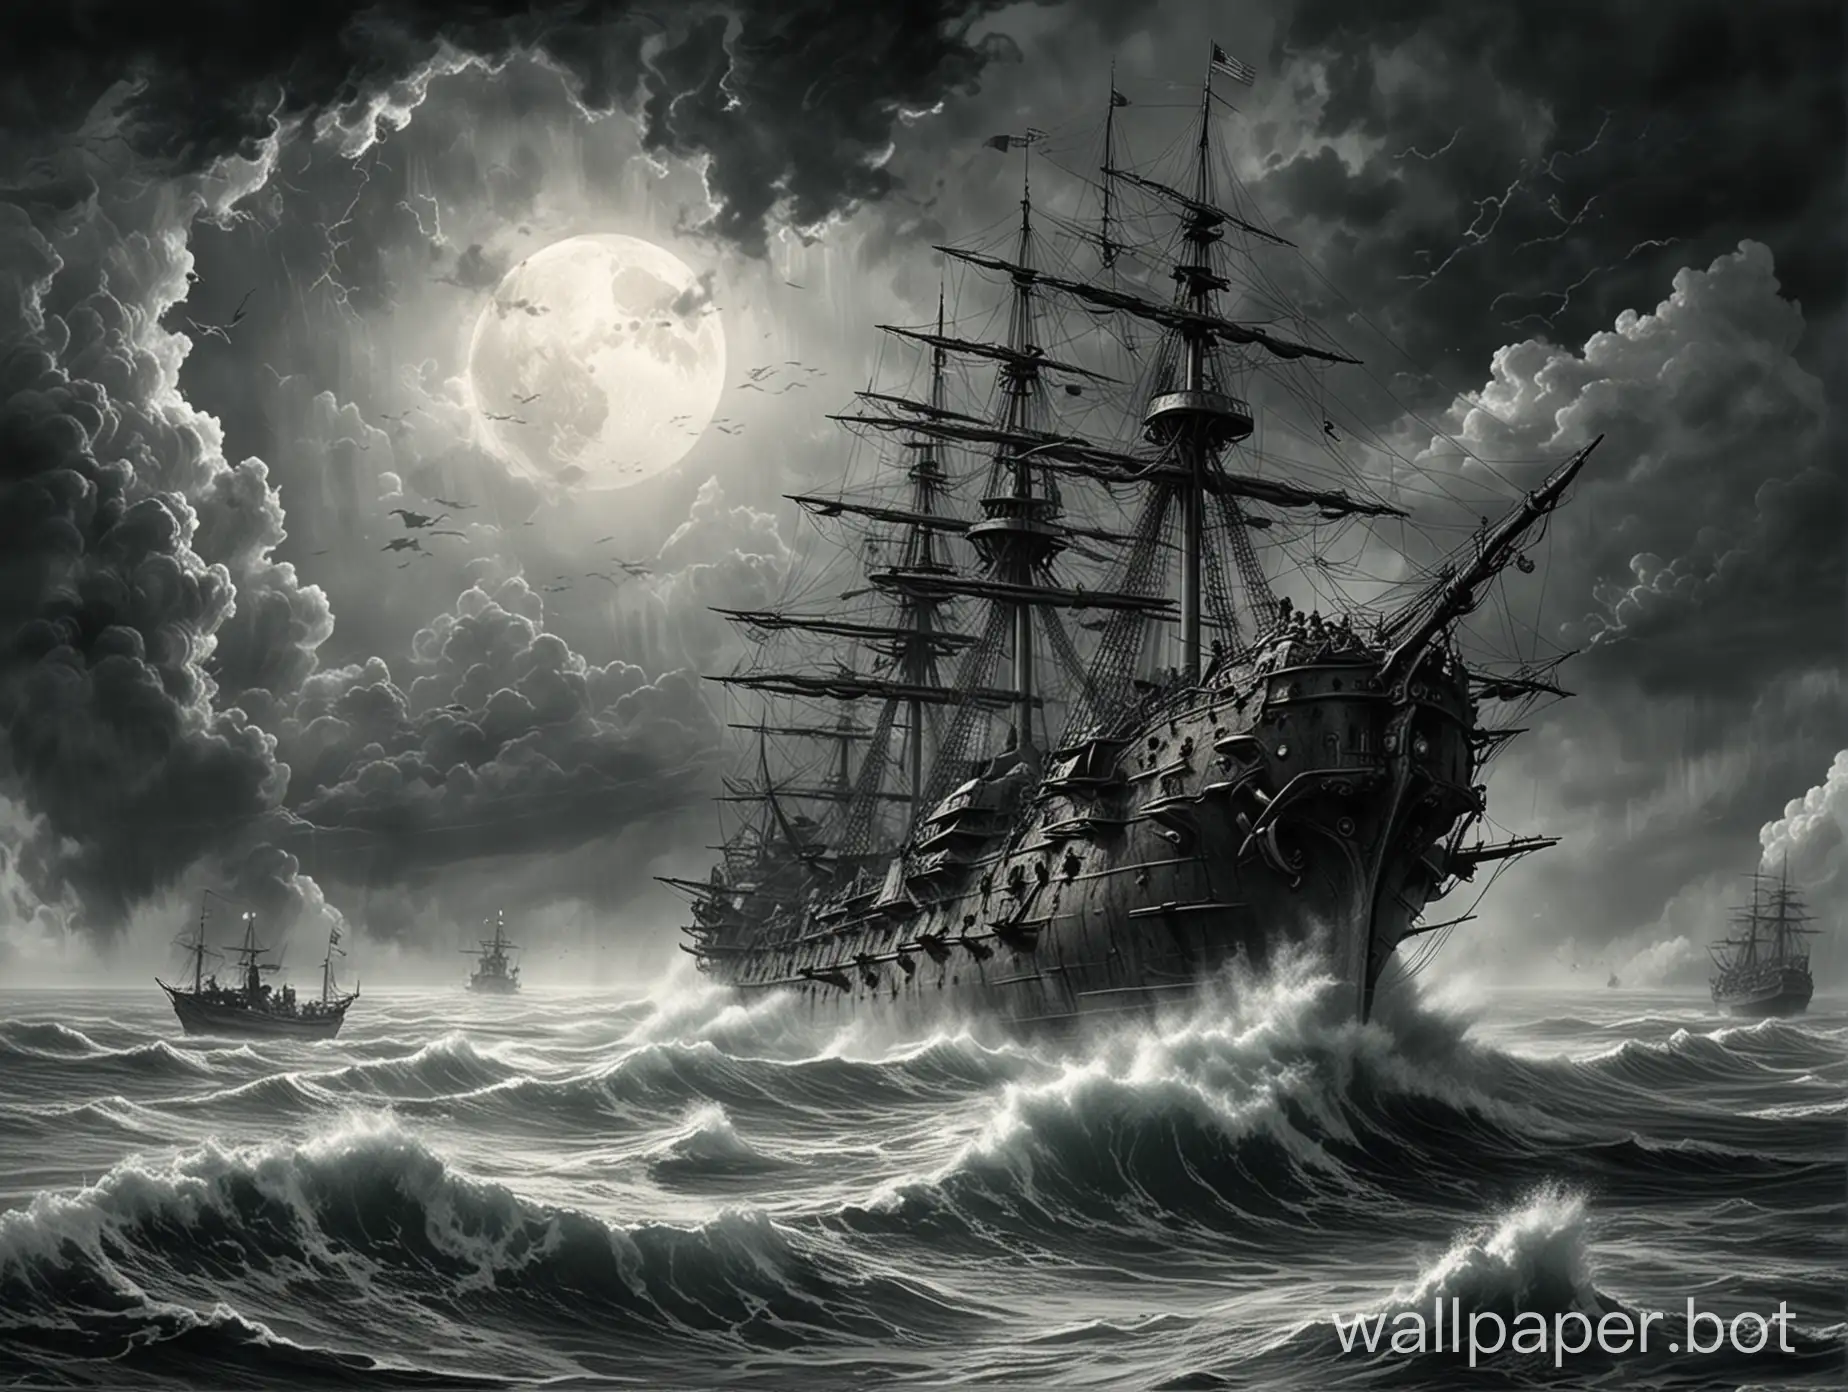 sea storm naval battle 2 armored ship end of 20th century storm clouds appear moon high resolution sketch pencil style Luis Royo